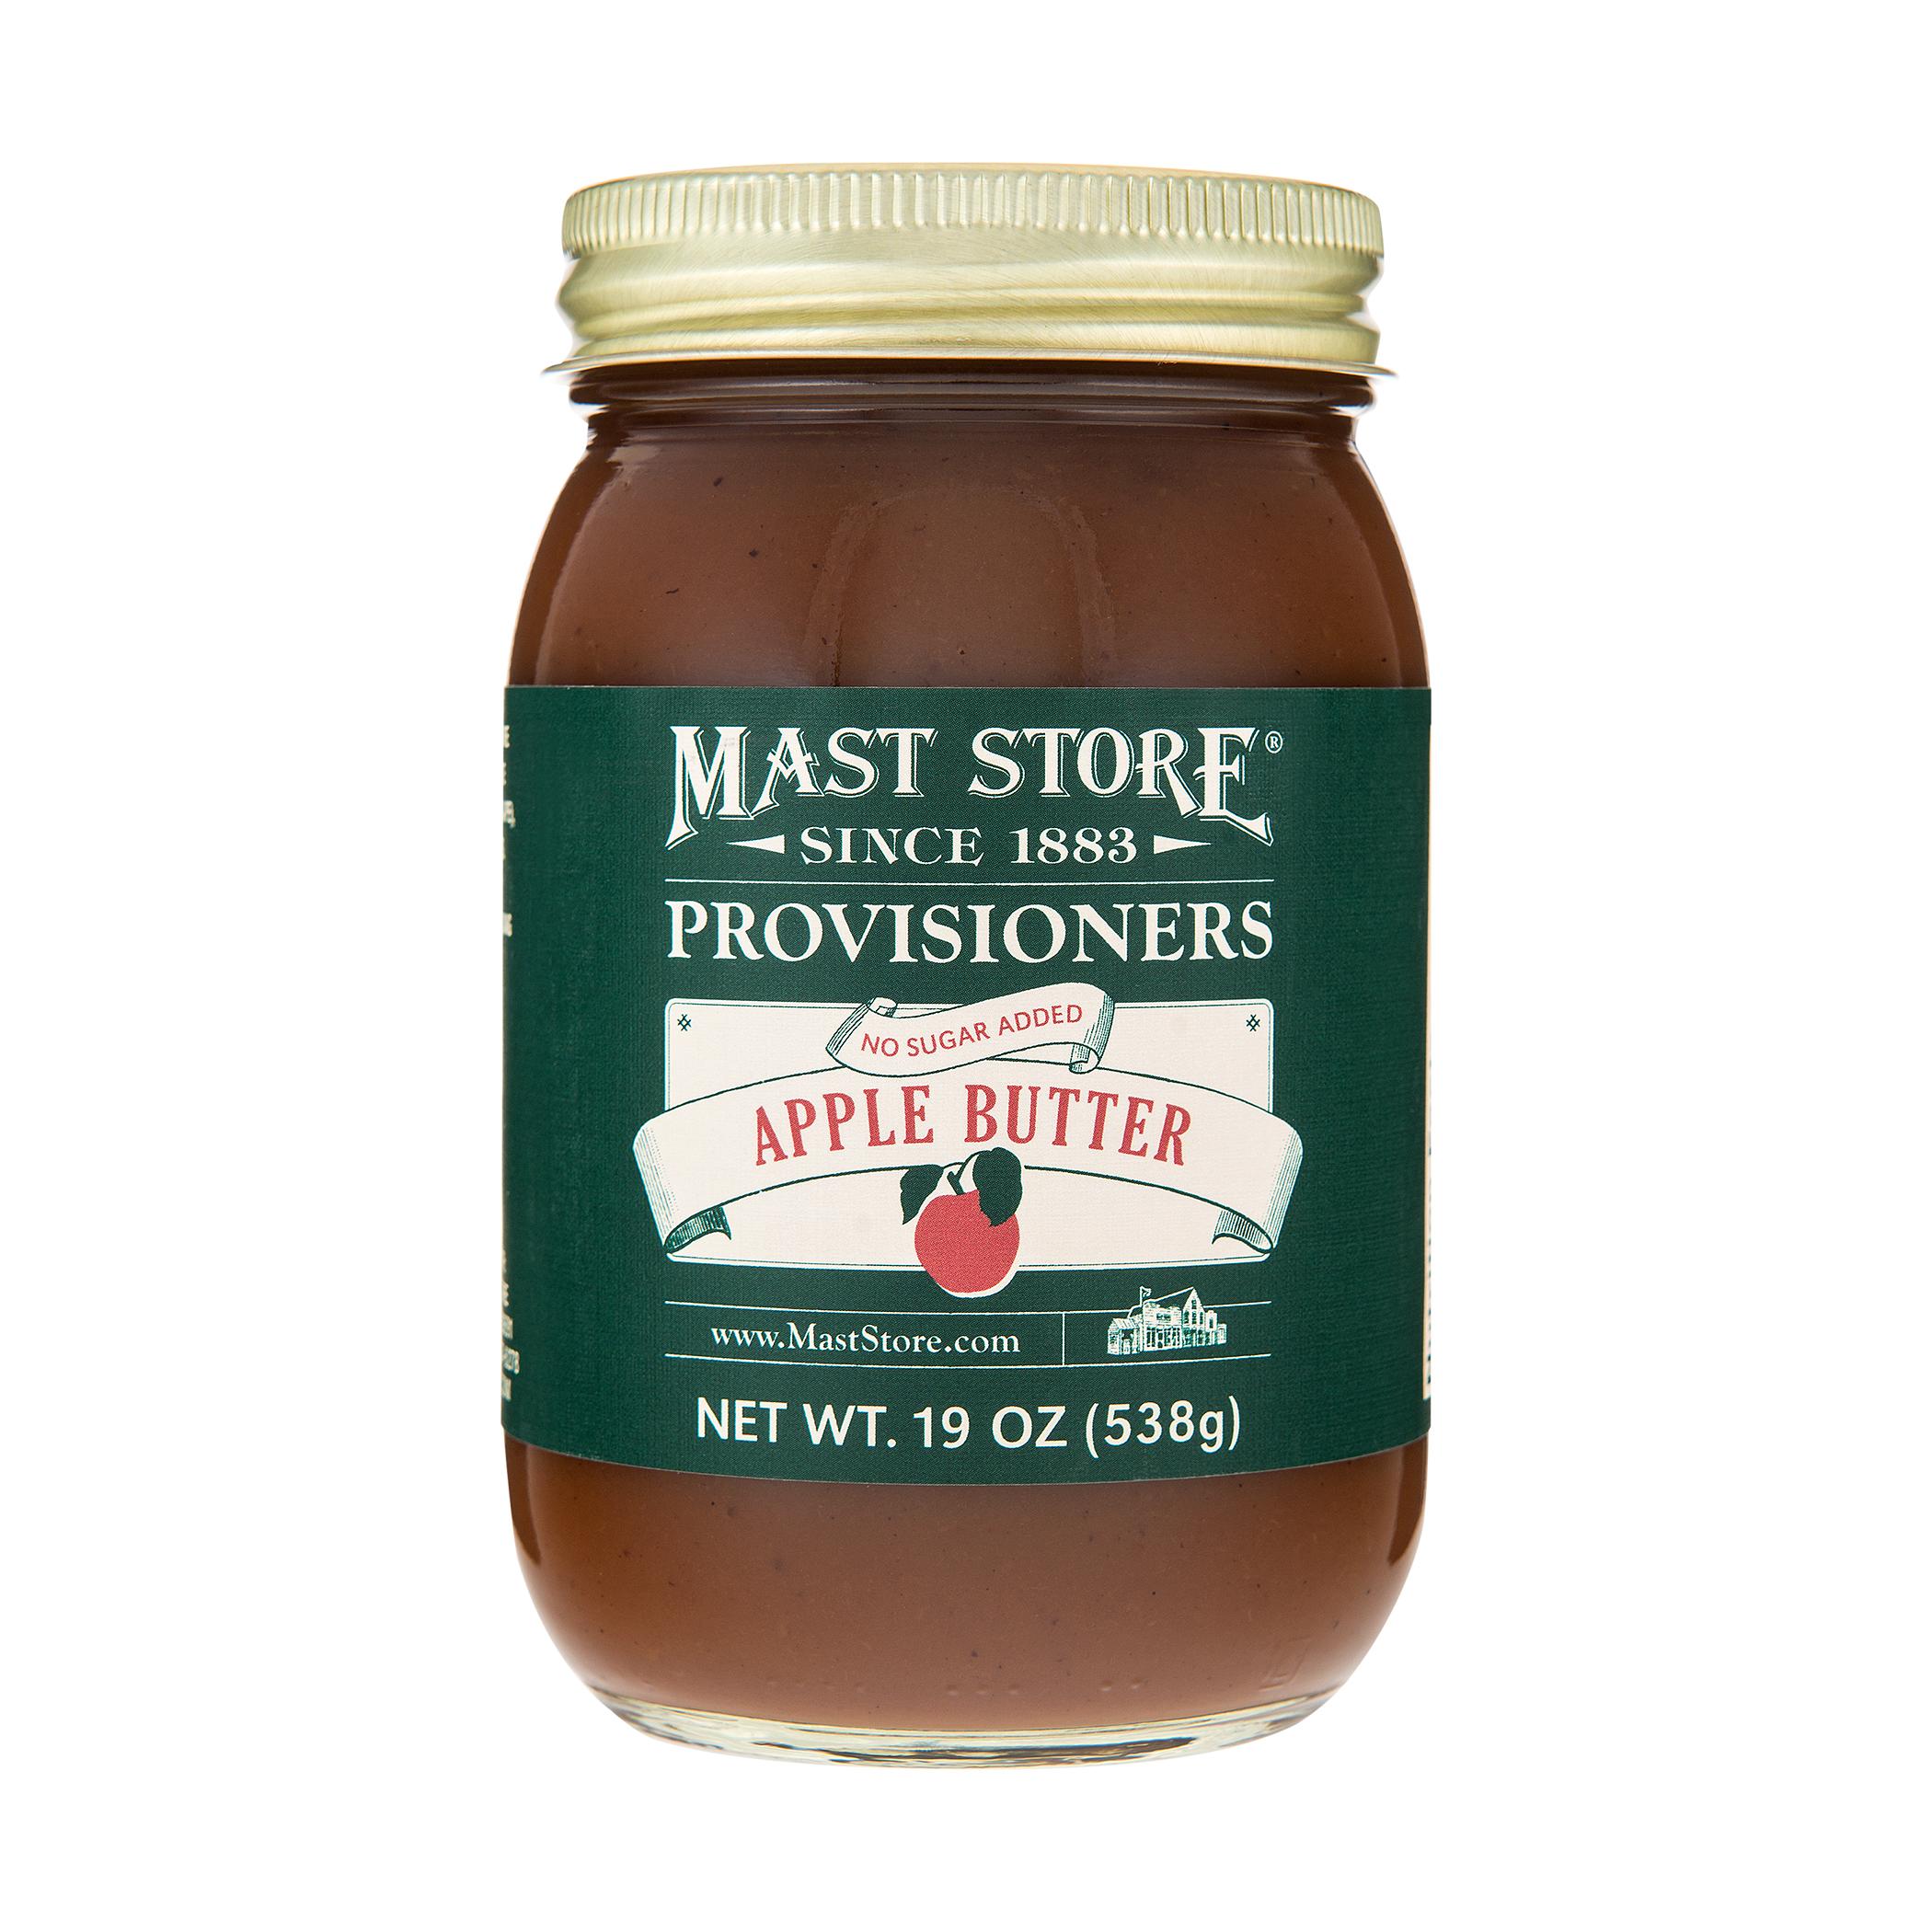  Mast Store Provisioners Apple Butter - No Sugar Added - Pint